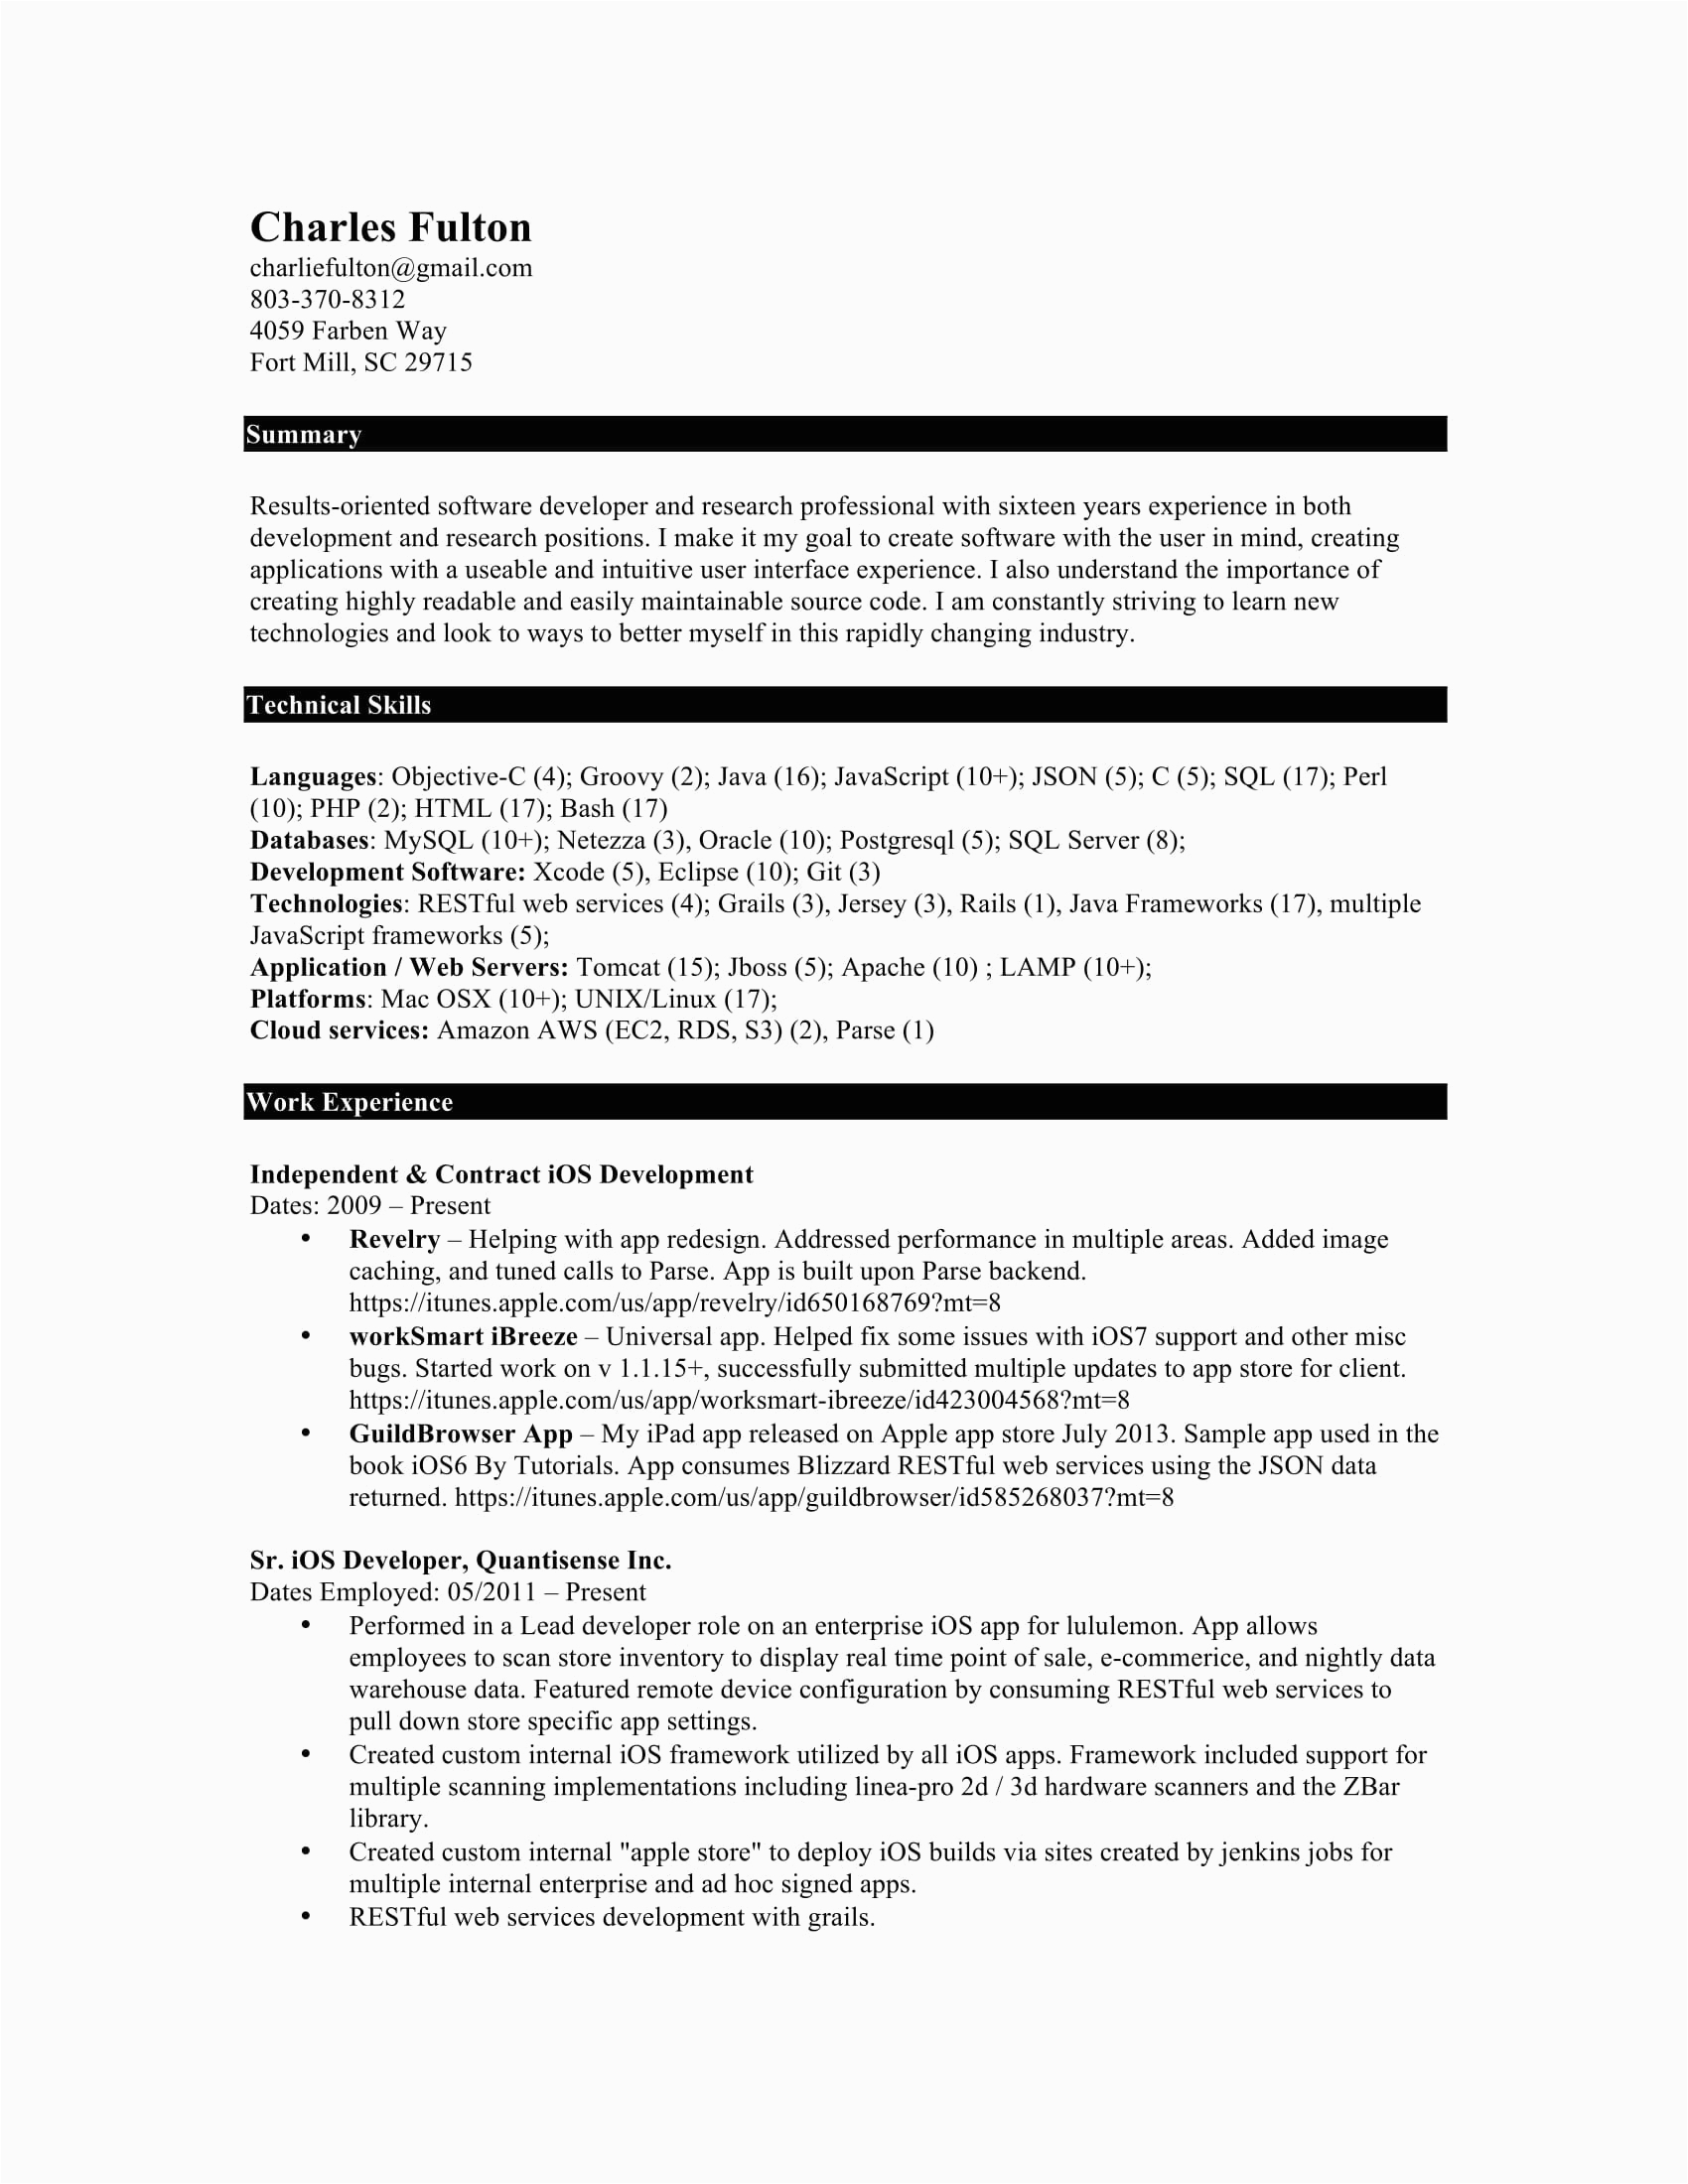 2 year experience resume format for